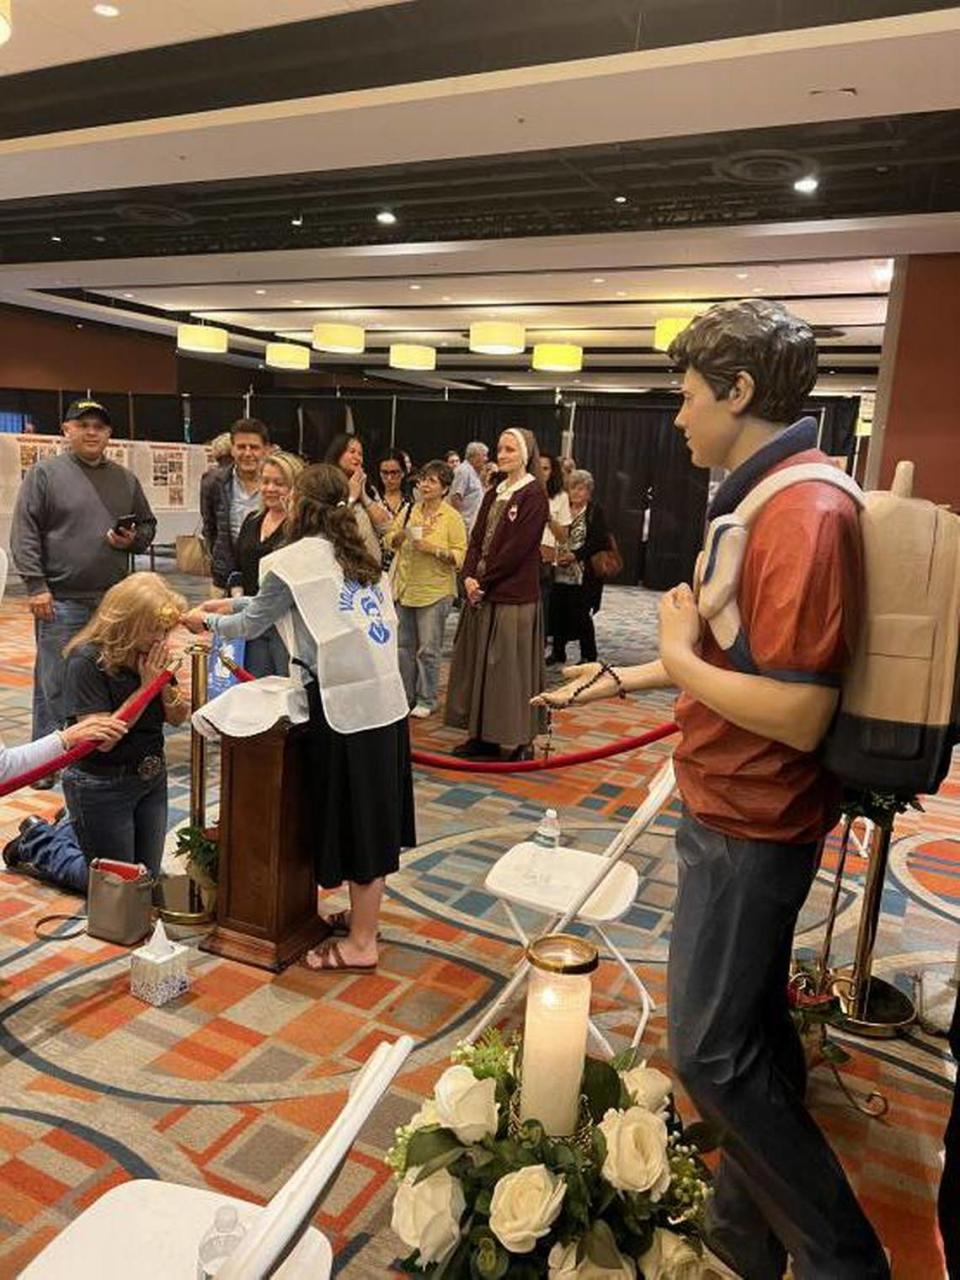 People line up to pray to a relic of Carlo Acutis during an exhibit organized by the Archdiocese of Miami in 2022. Acutis is set to become the first millennial saint in the Catholic Church.